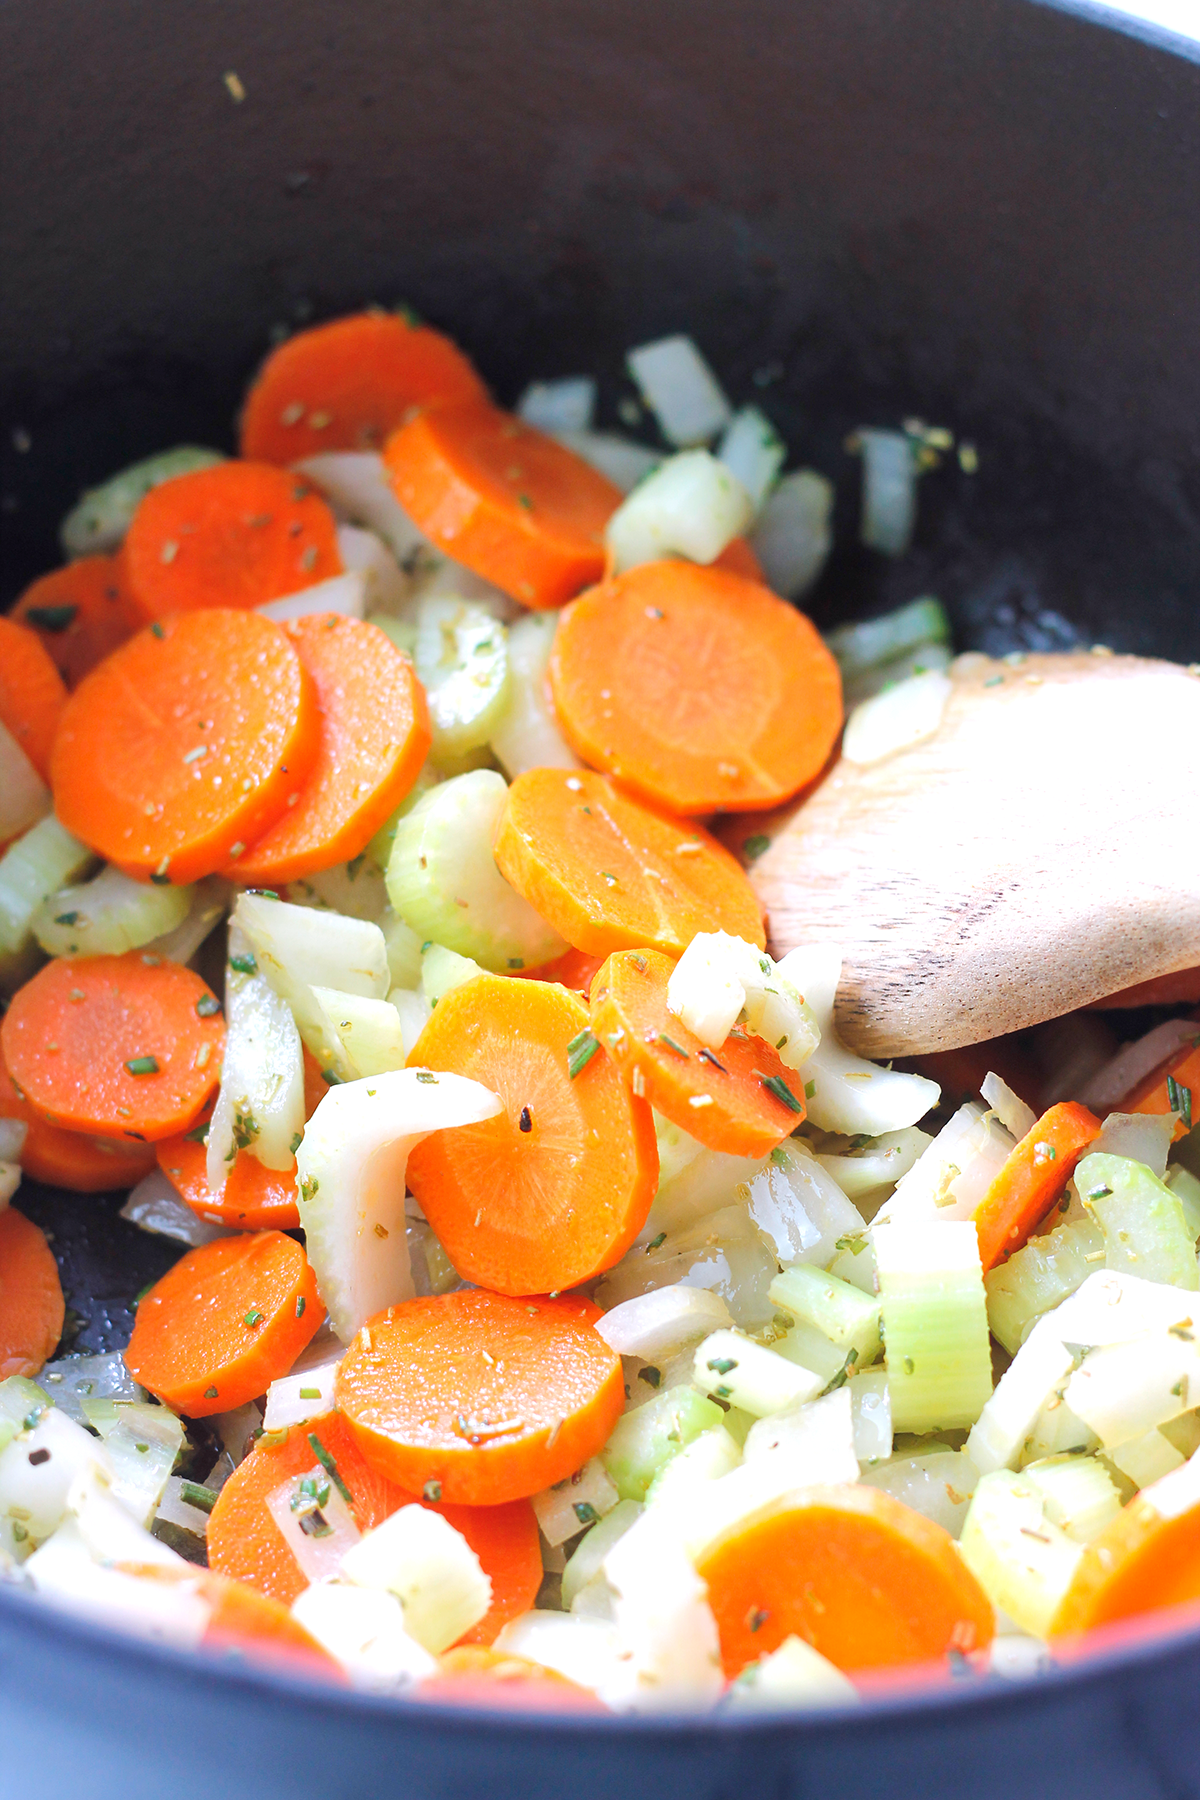 Sliced carrots, onions, and celery sauteing in pot.